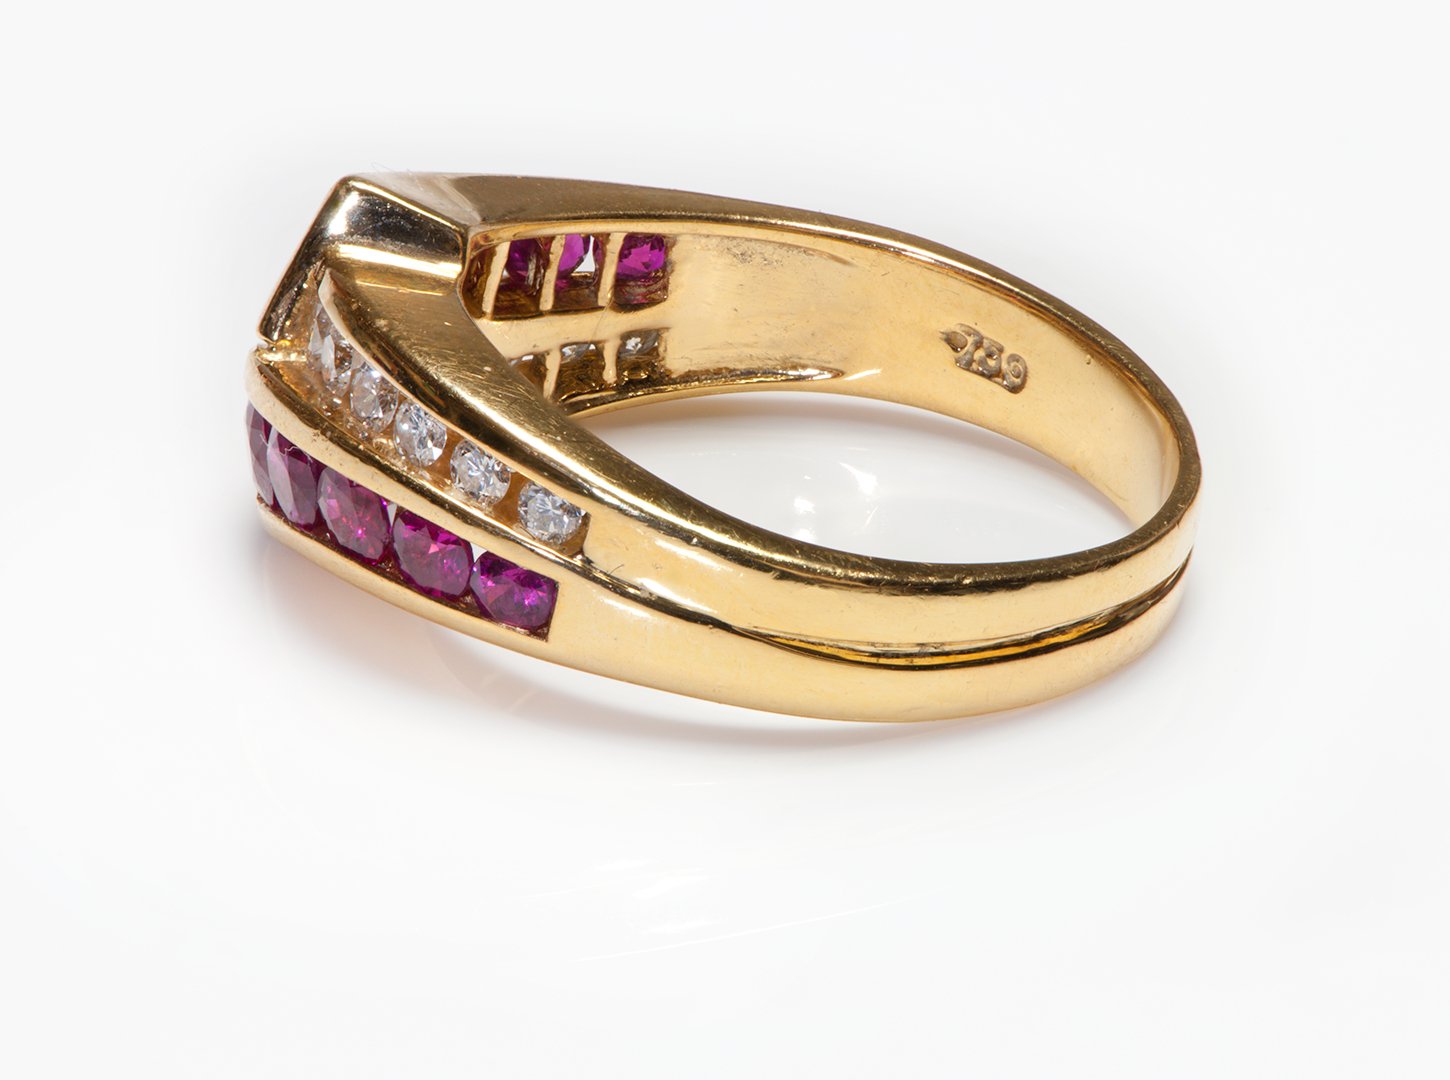 Charles Krypell 18K Gold Ruby Diamond Ring - DSF Antique Jewelry